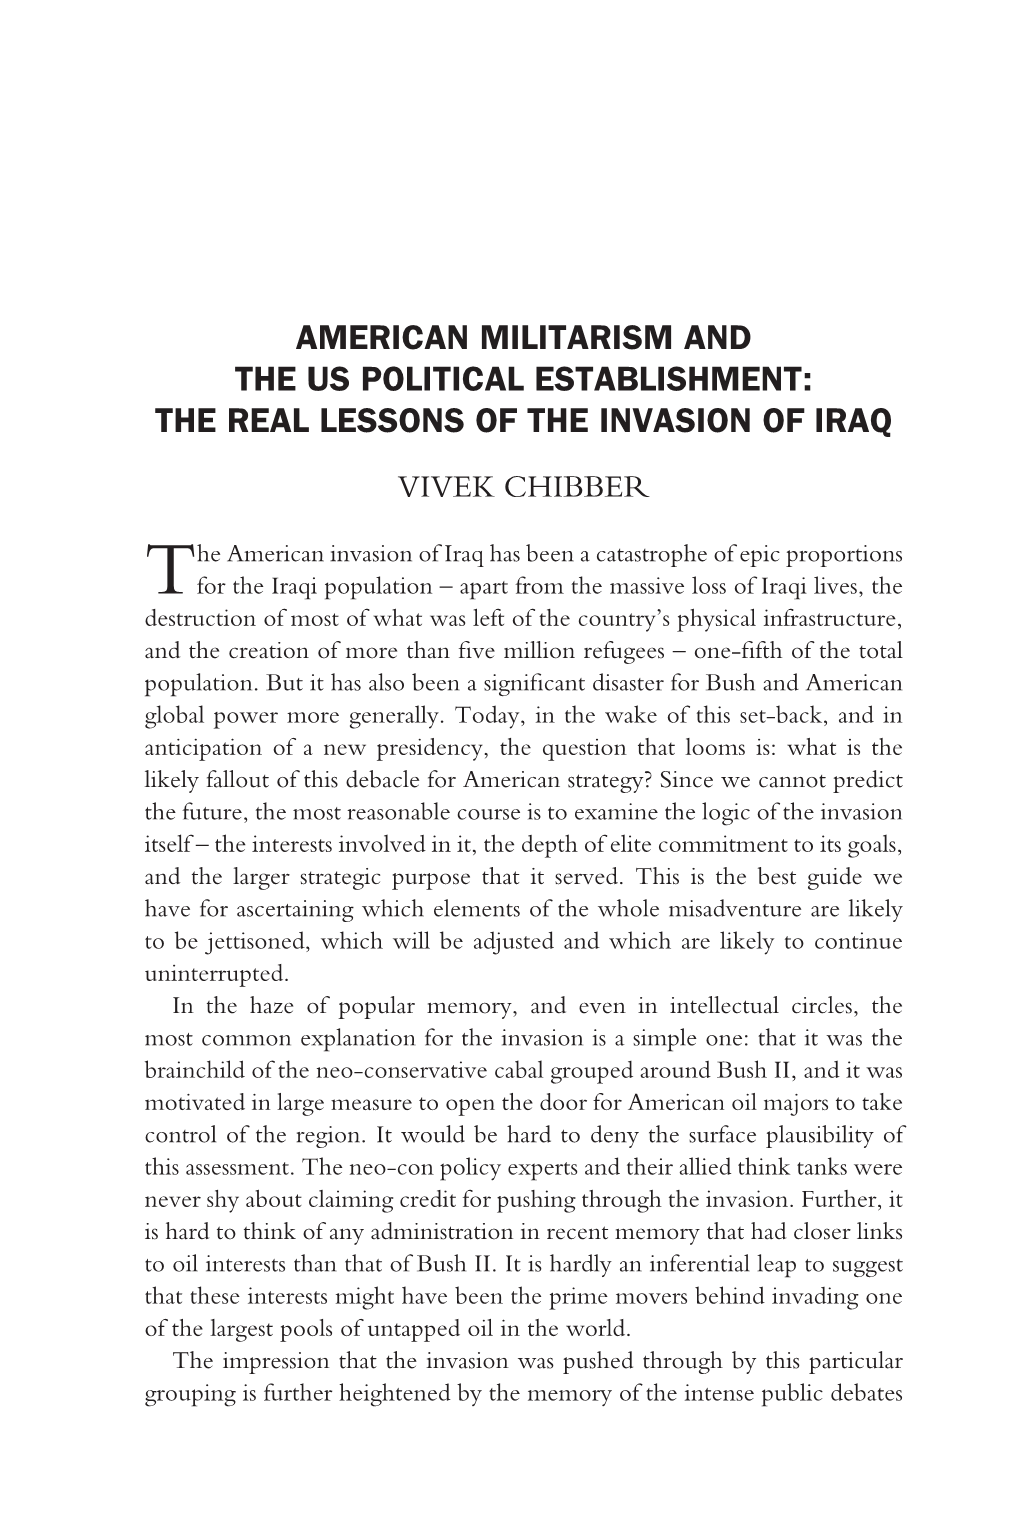 American Militarism and the Us Political Establishment: the Real Lessons of the Invasion of Iraq